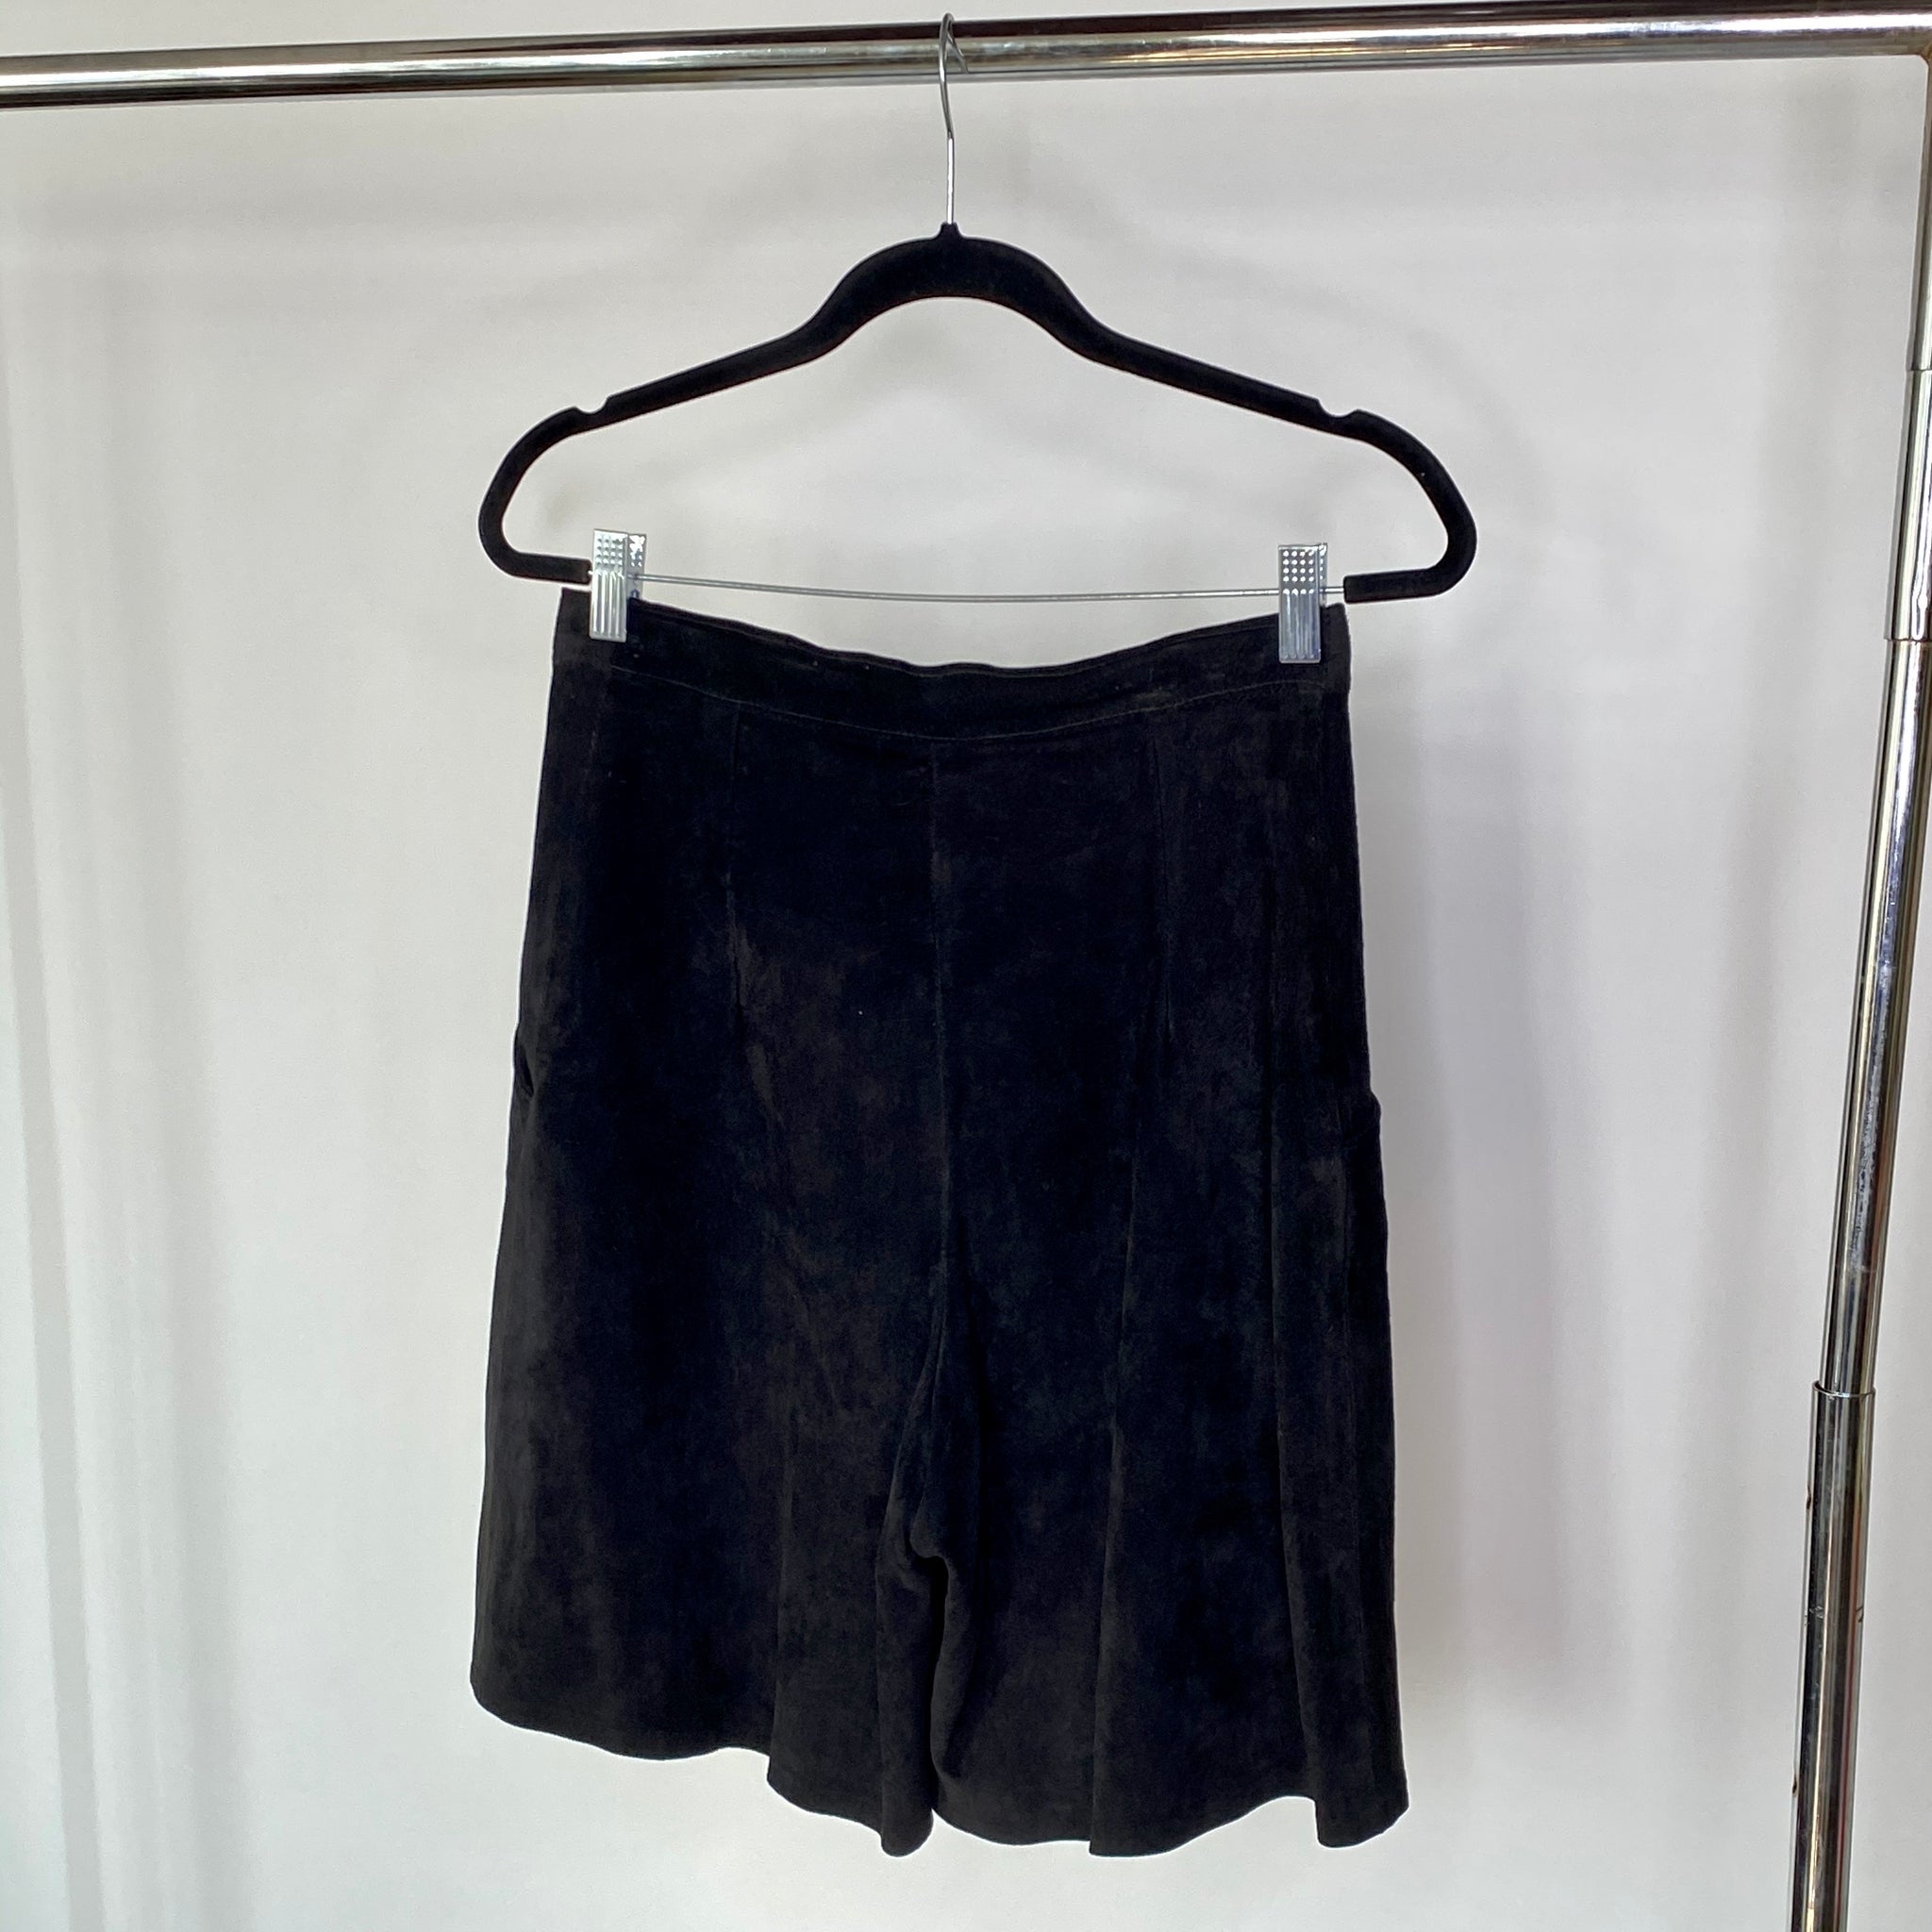 FIRENZE Leather Shorts